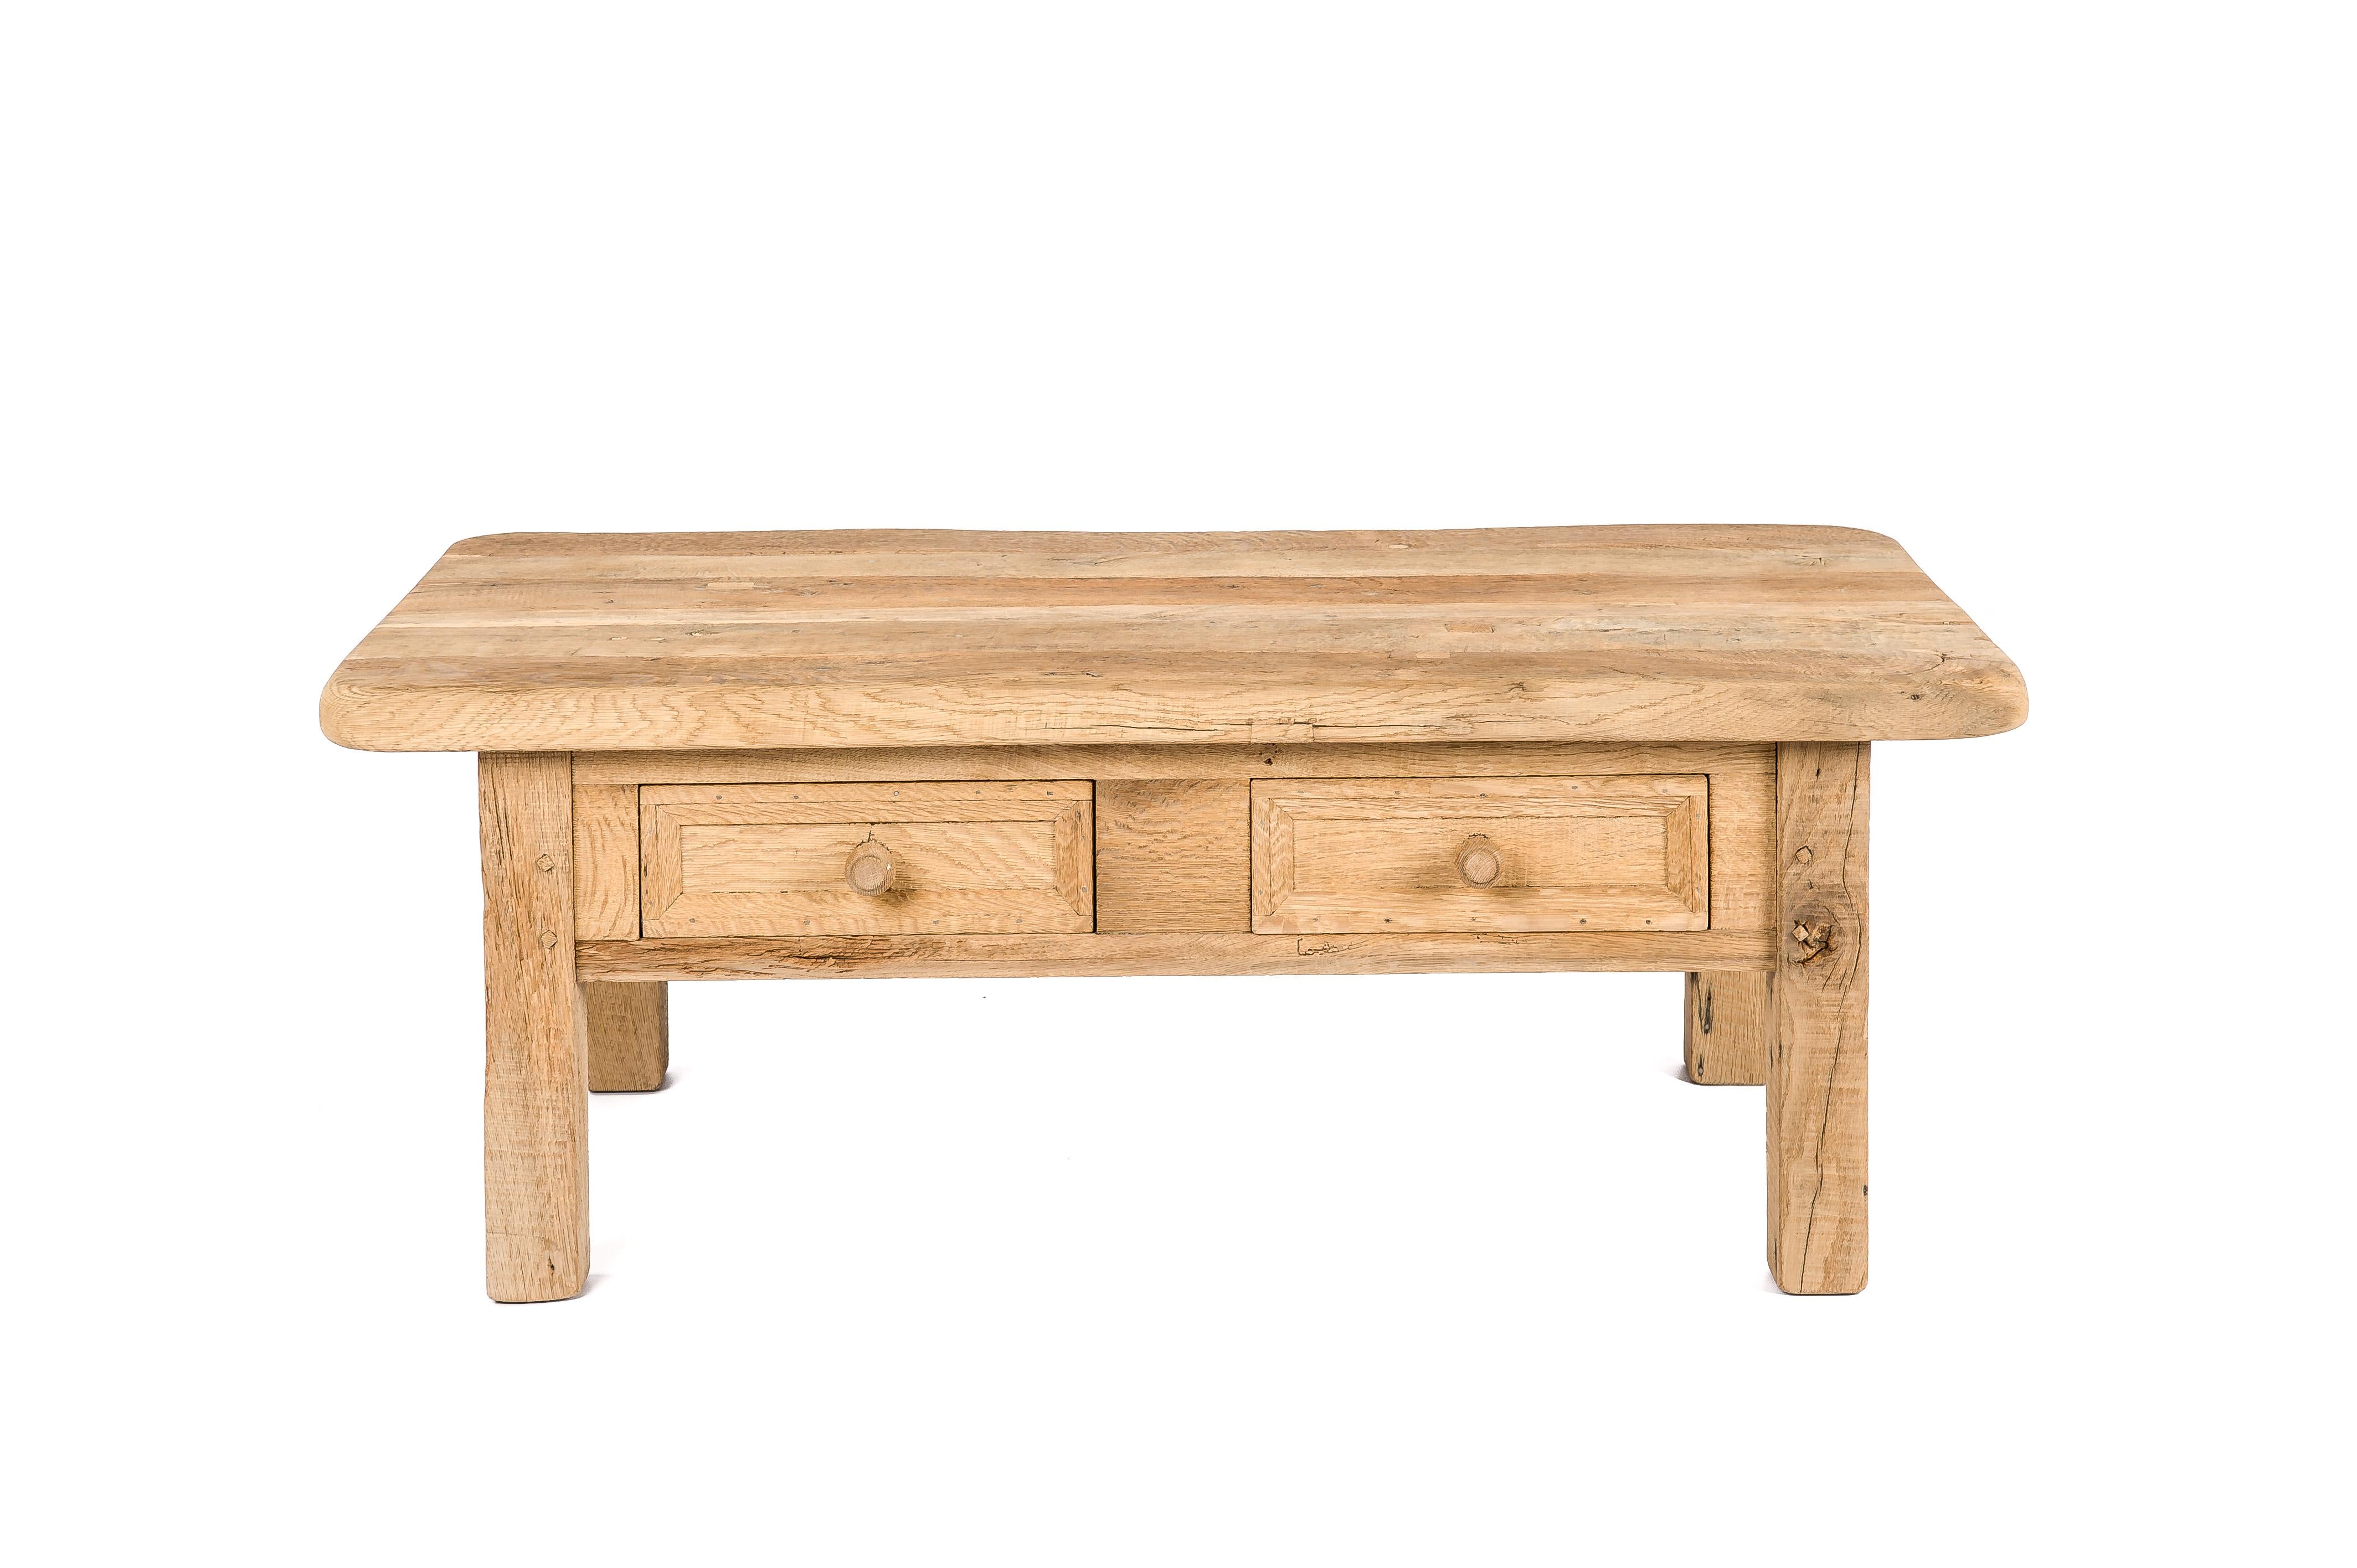 This rustic table was made in The Netherlands in the mid-20th century. It is completely made from old solid oak beams. The wood was reclaimed from centuries-old half-timbered houses in Germany. The wood was aged beautifully through many years of